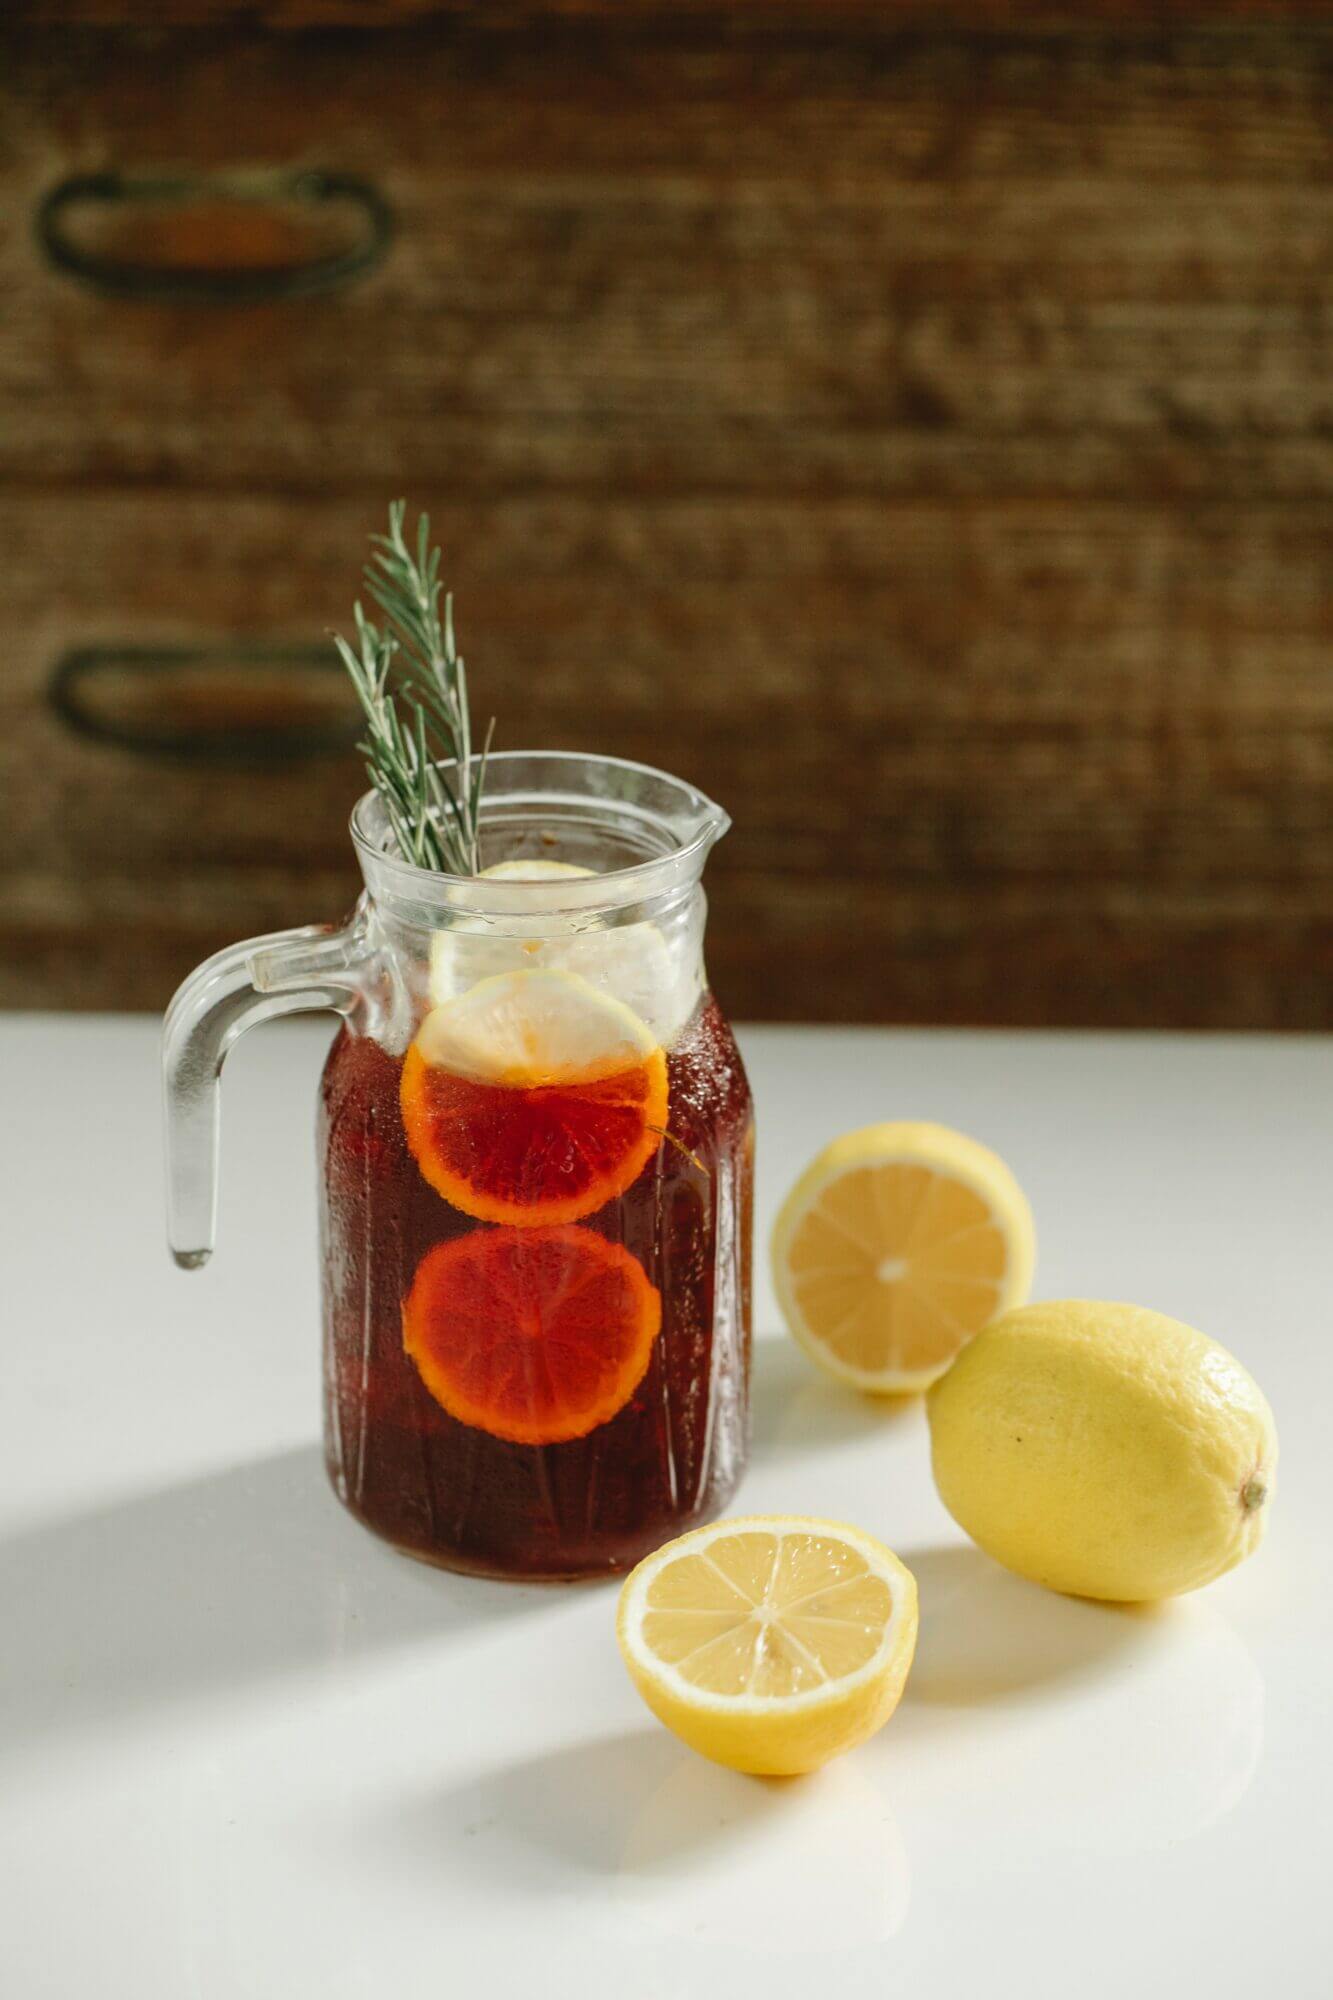 A pitcher of lemonade with lemon slices and sprigs of rosemary.